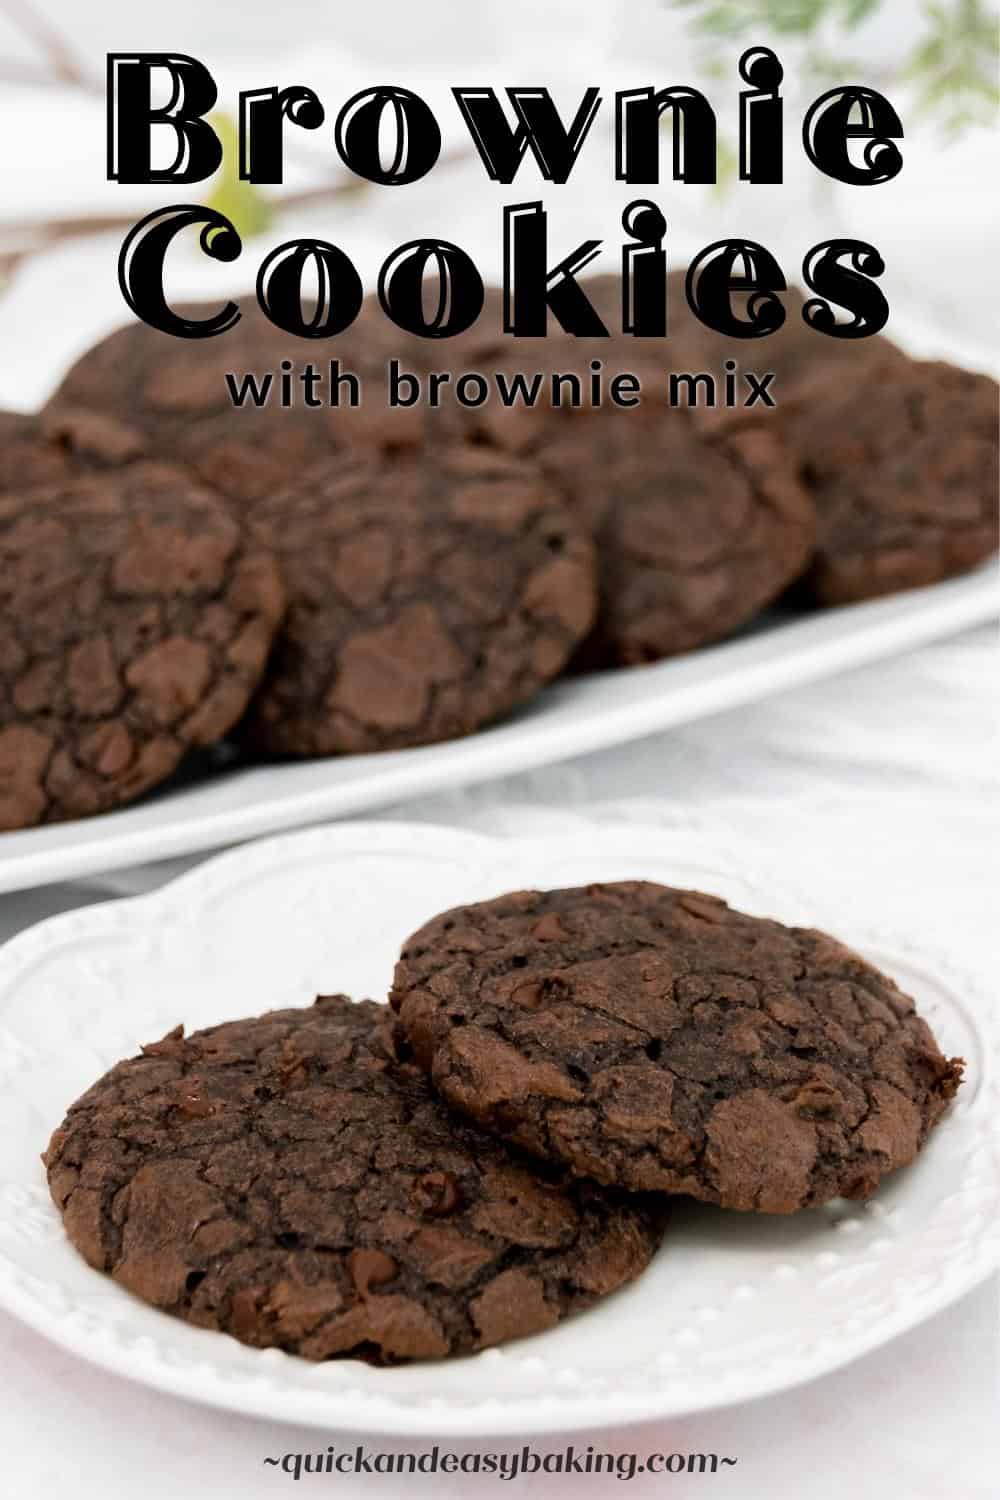 Two chocolate cookies on a white plate with a tray of cookies and text overlay.